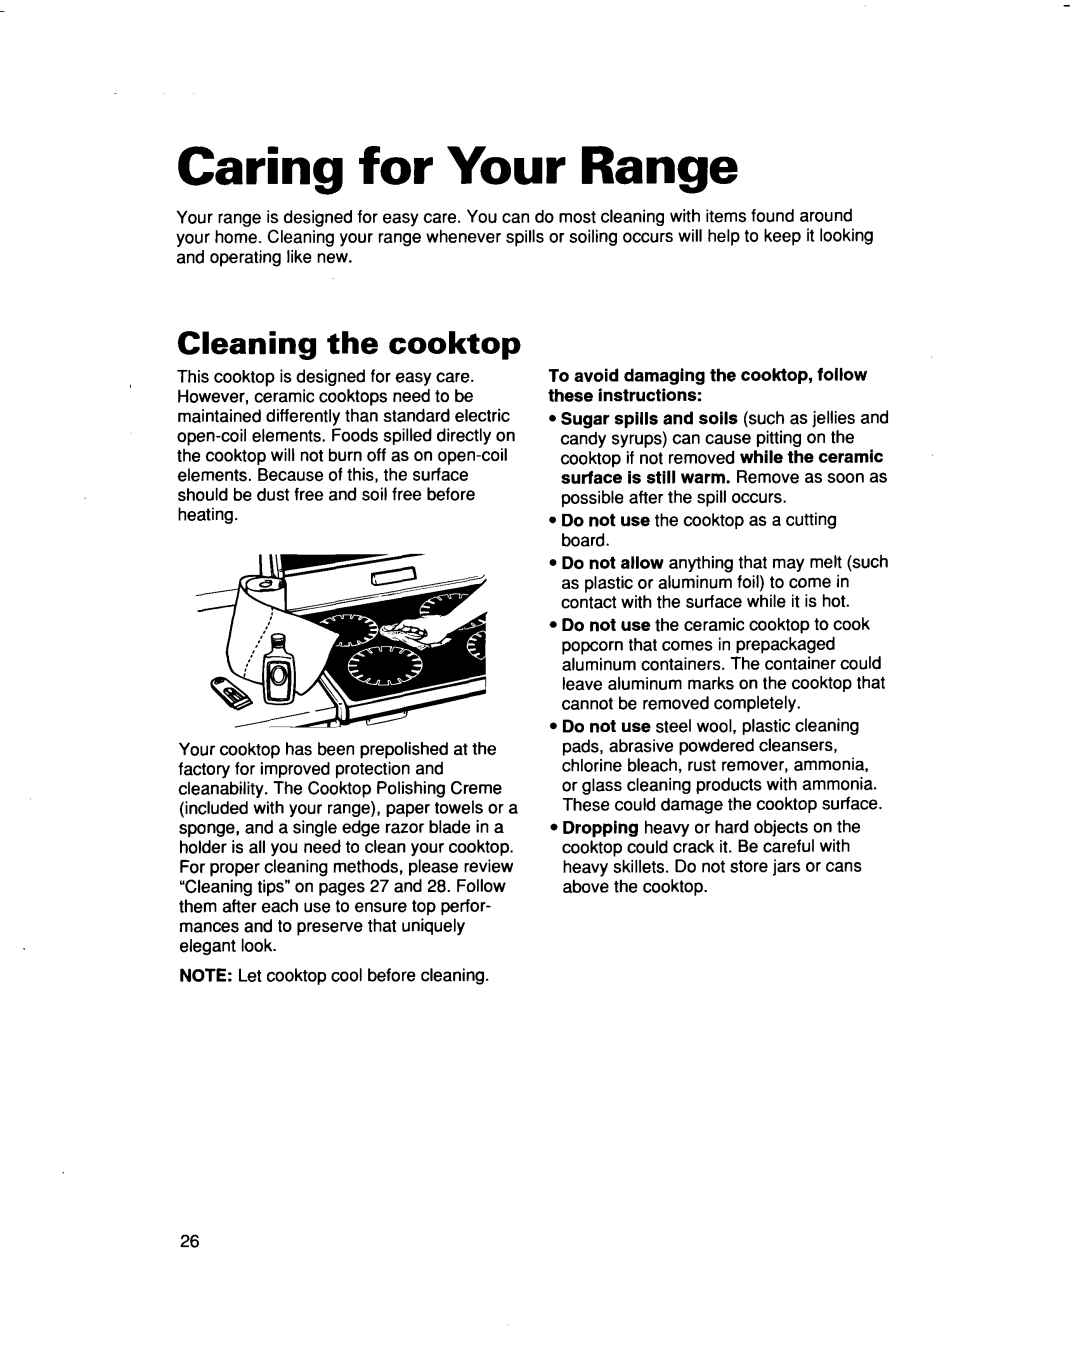 Whirlpool RF354BXD warranty Caring for Your Range, Cleaning the cooktop 